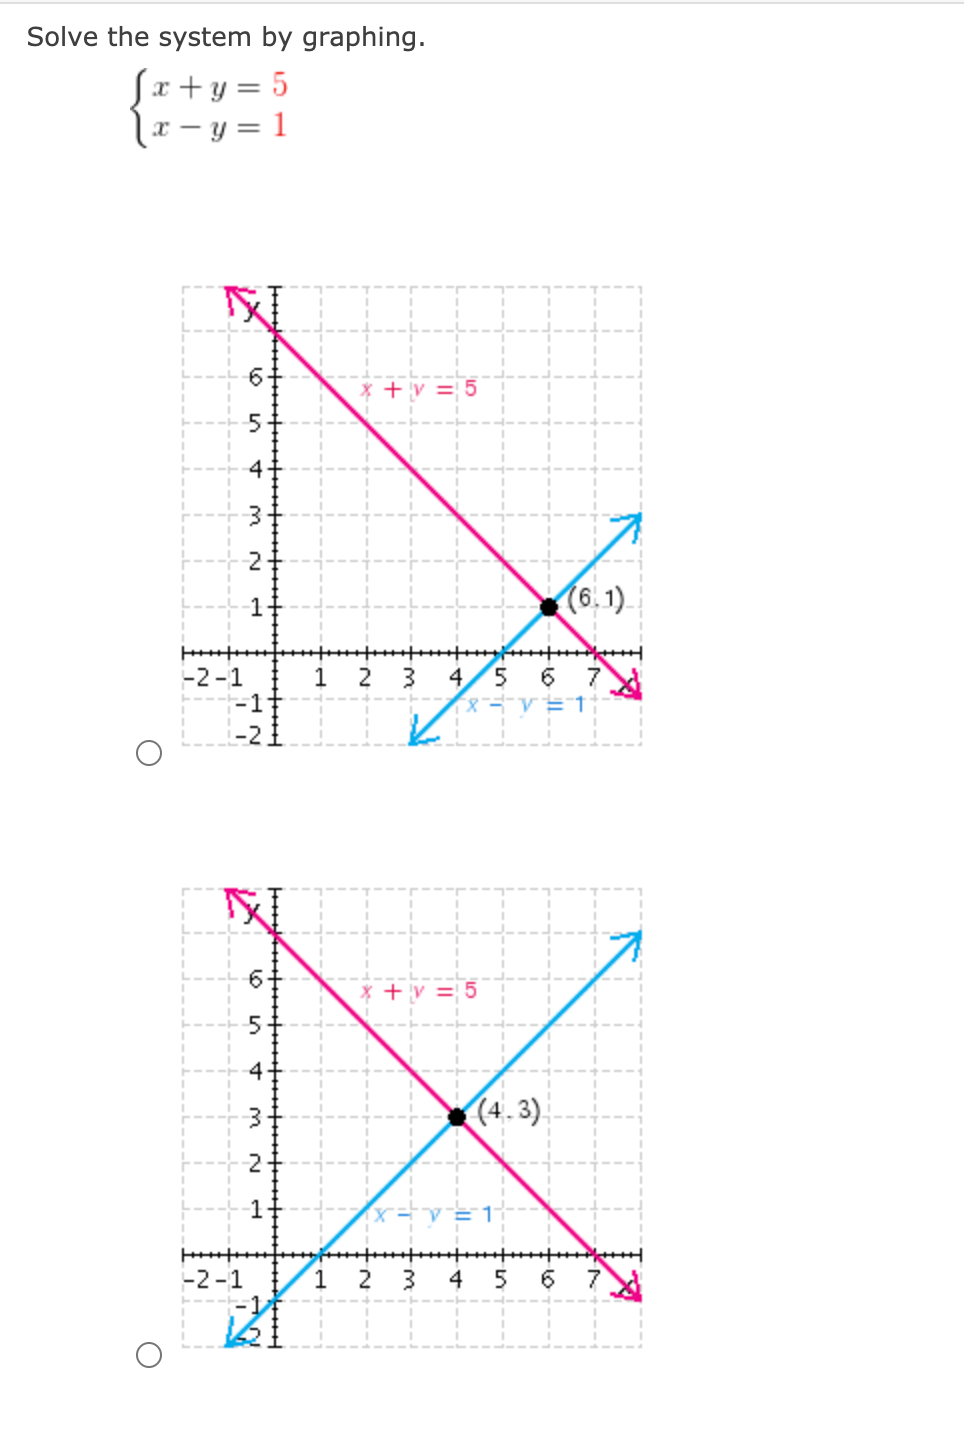 Solve the system by graphing.
Sx+y = 5
lx - y = 1
+v = 5
(6.1).
4/5 6
6-
+v = 5
(4.3)
-2-1
